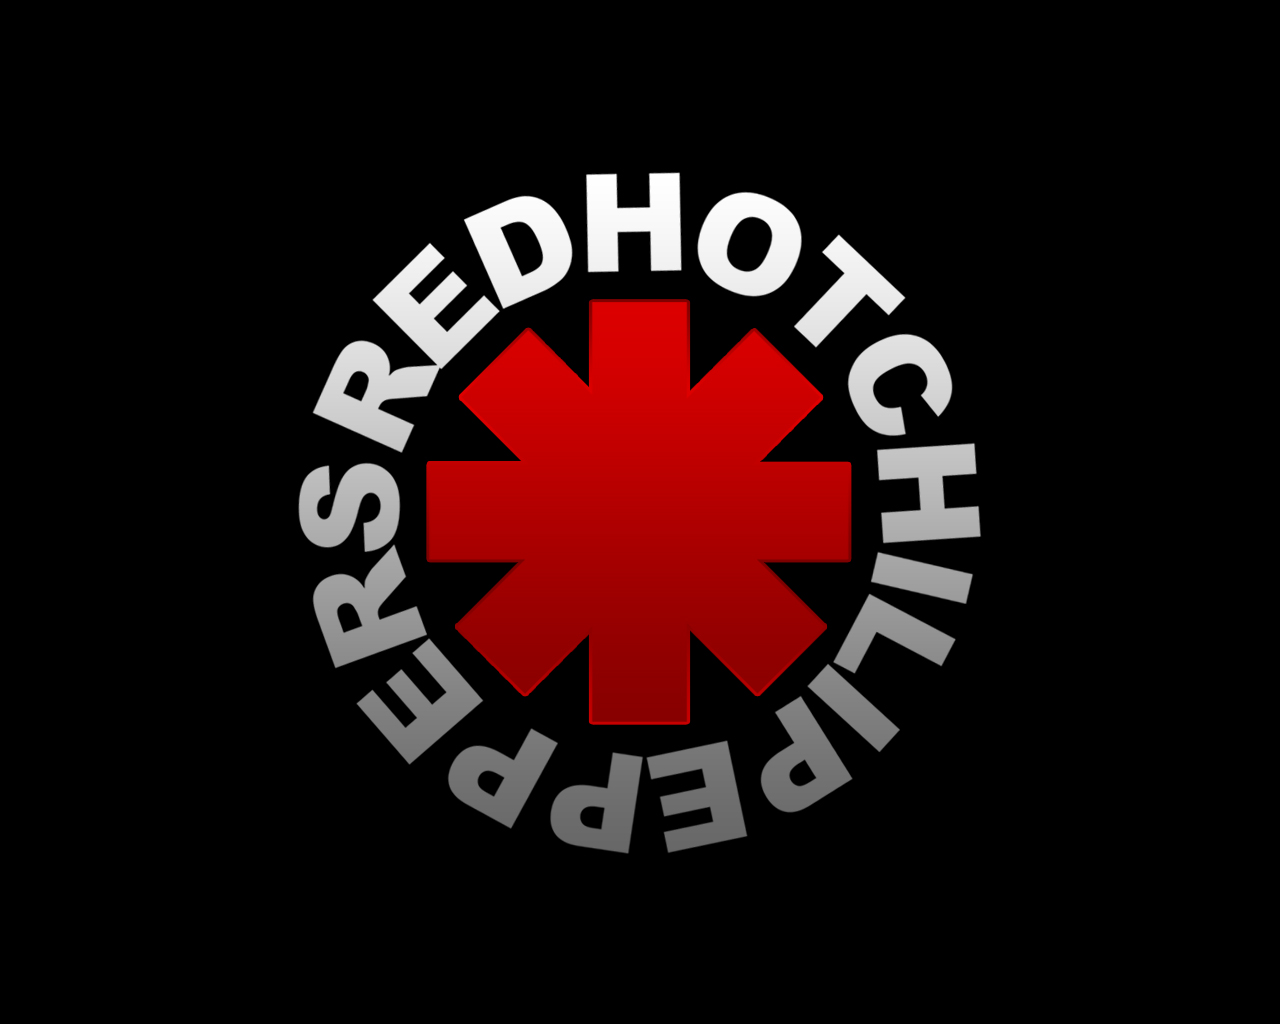 2 Red Hot Chili Peppers wallpapers for your PC, mobile phone, iPad, iPhone.